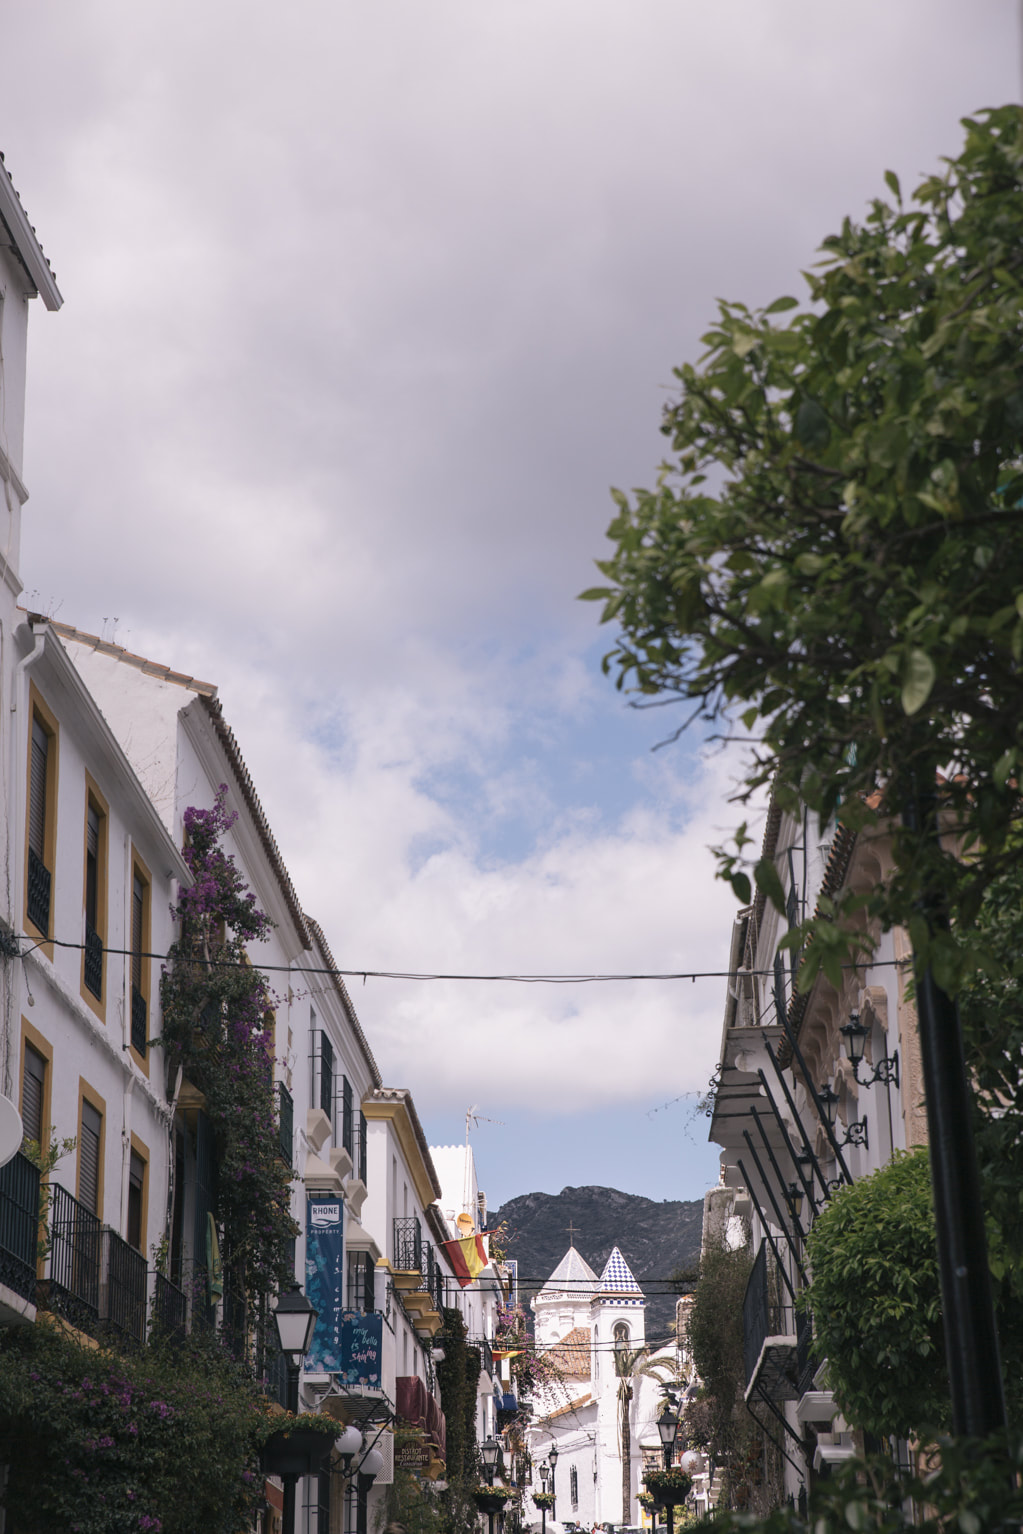 A coastal walk from Puerto banus to Marbella old town by The Belle Blog 